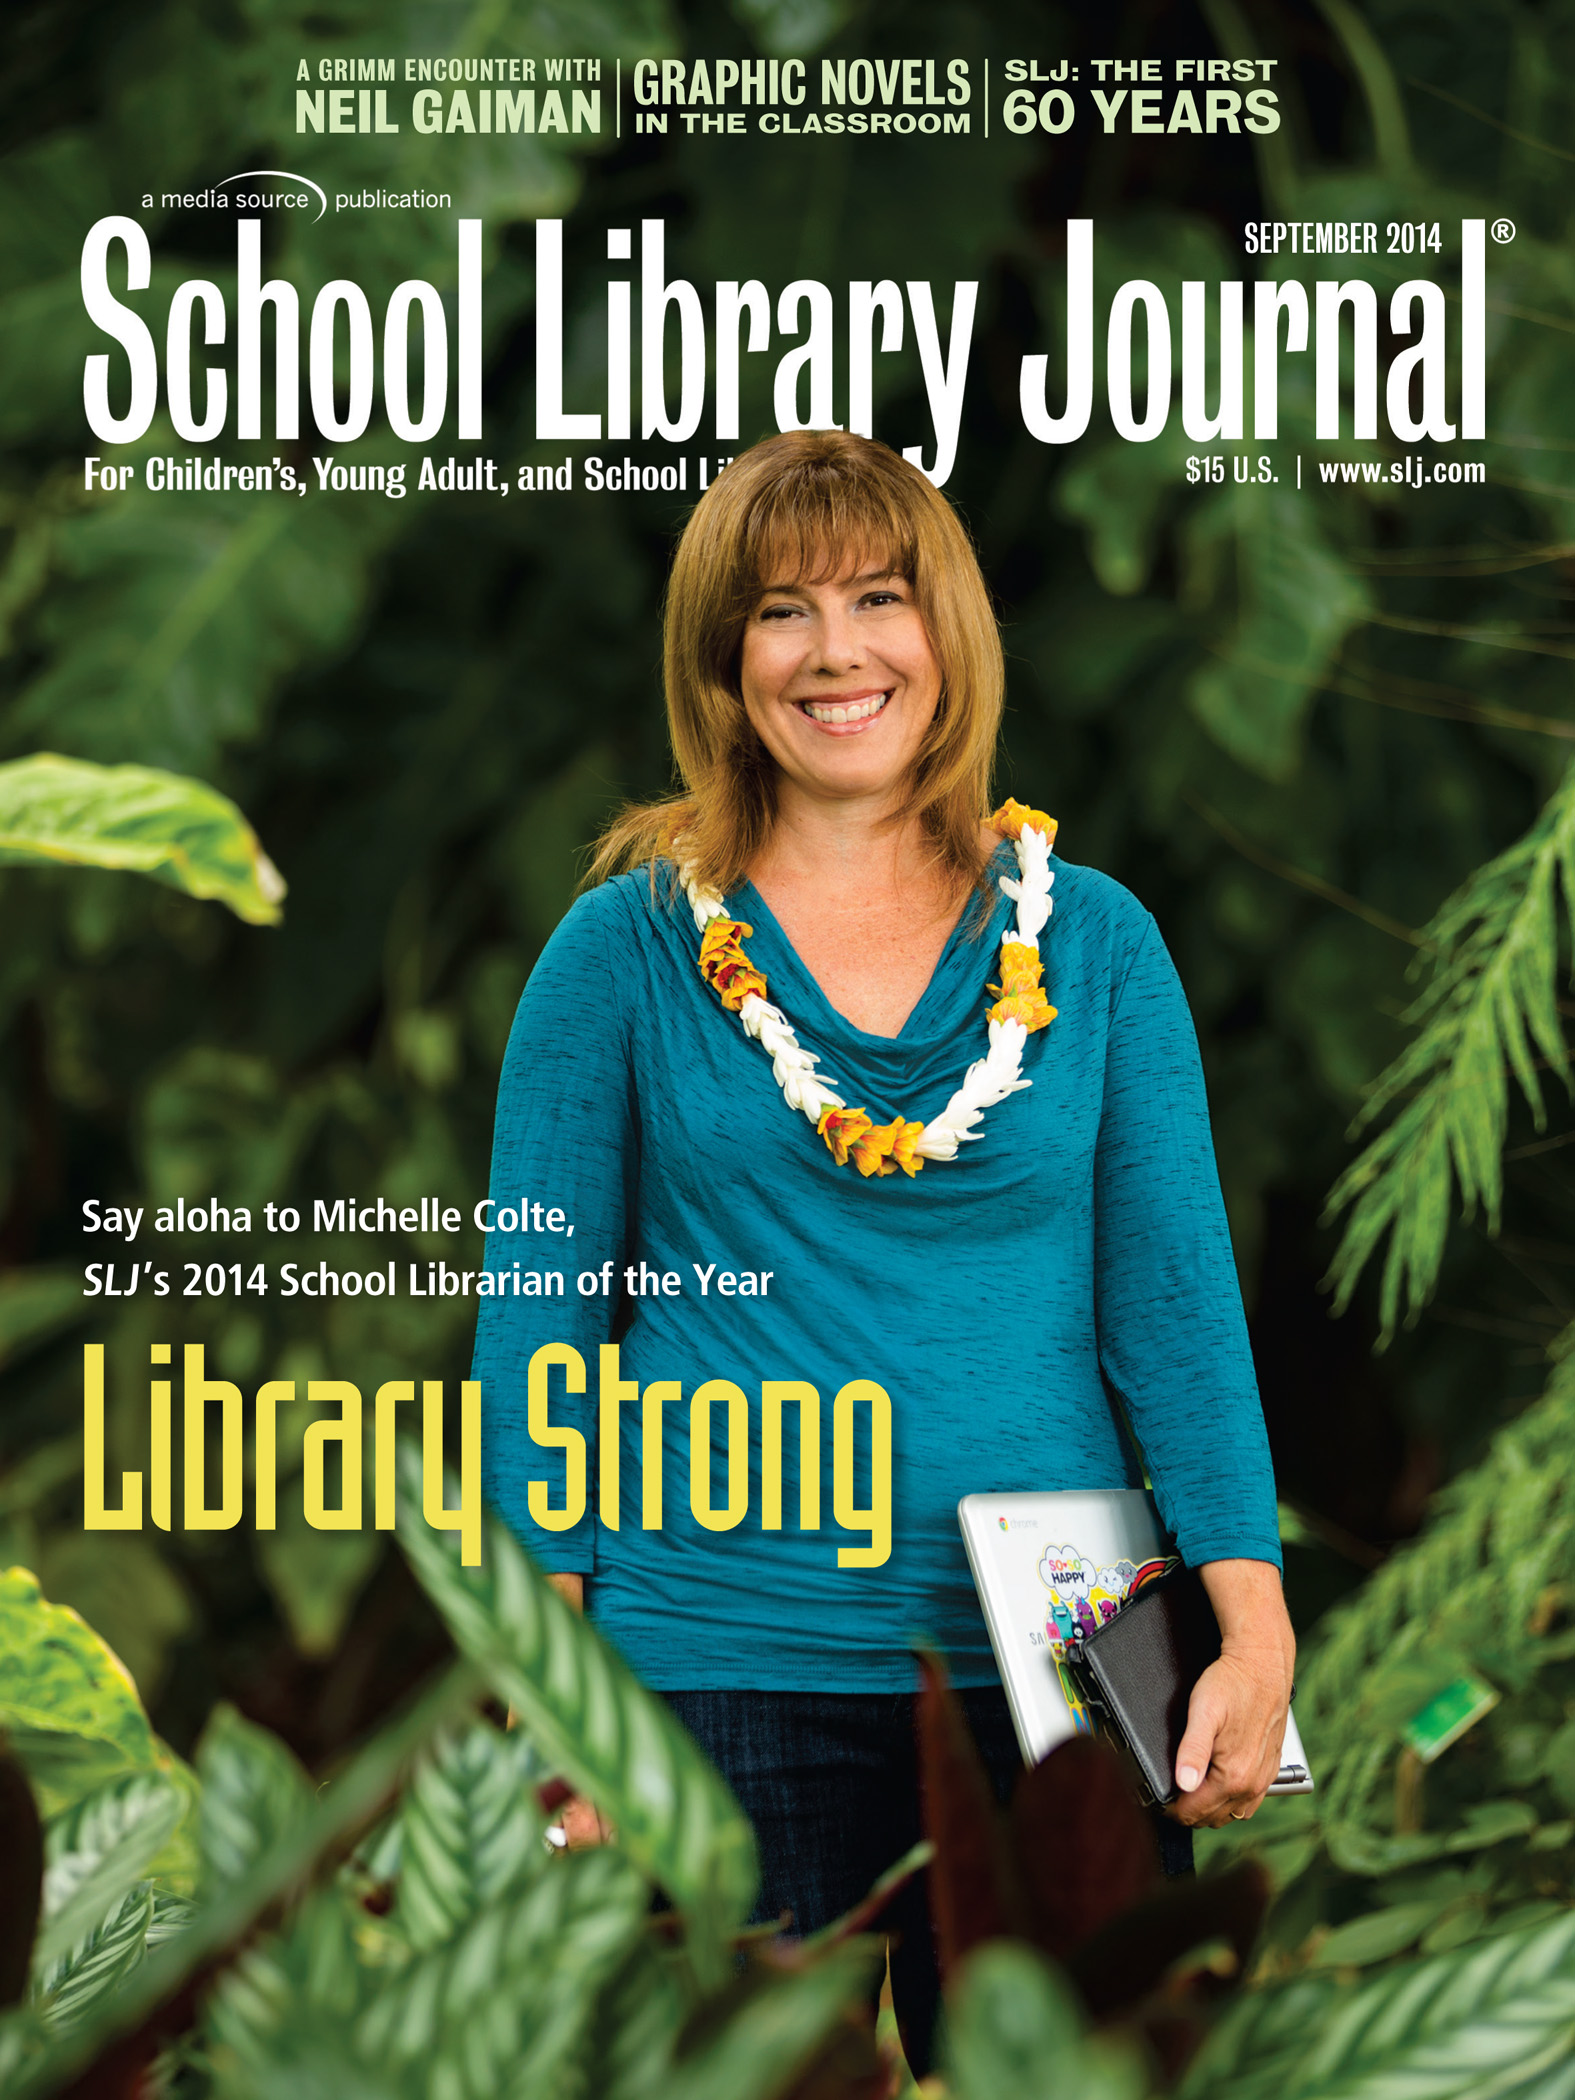 Meet Michelle Colte, SLJ’s 2014 School Librarian of the Year